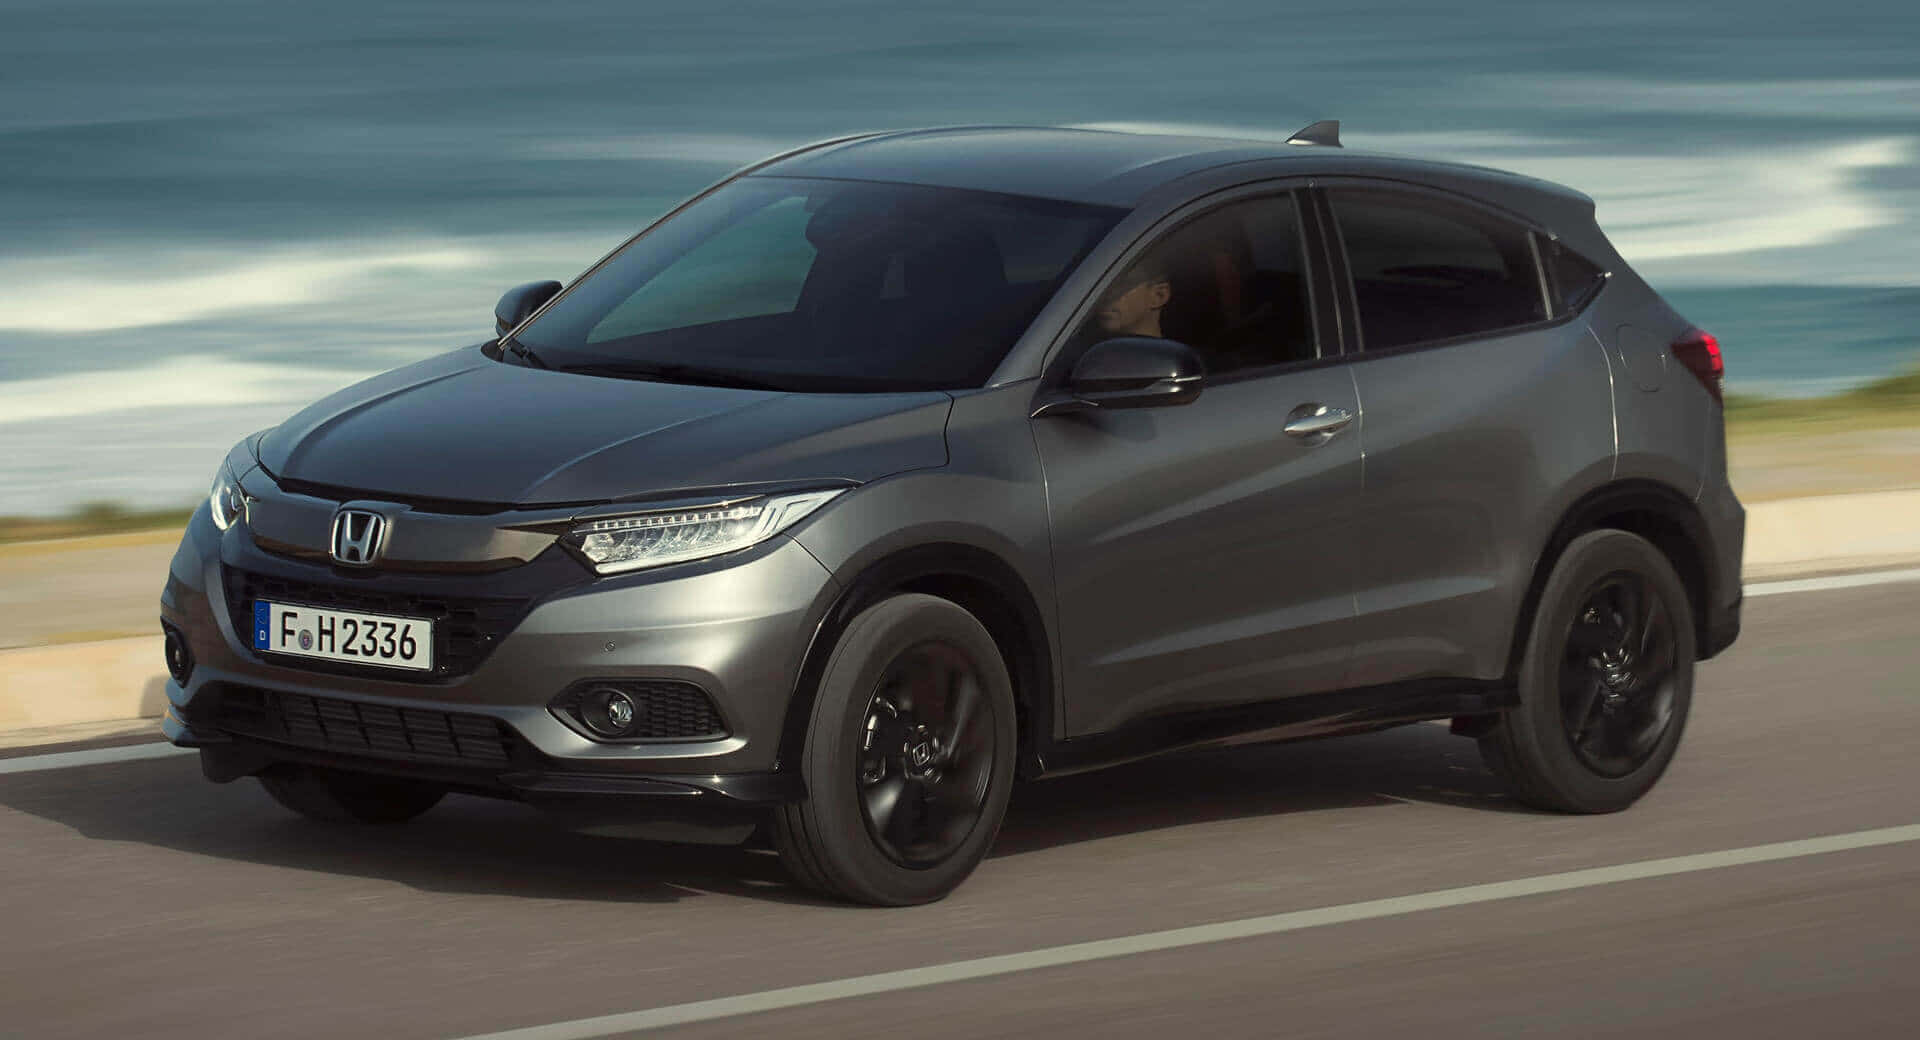 Sleek and Stylish Honda HR-V in a Scenic View Wallpaper